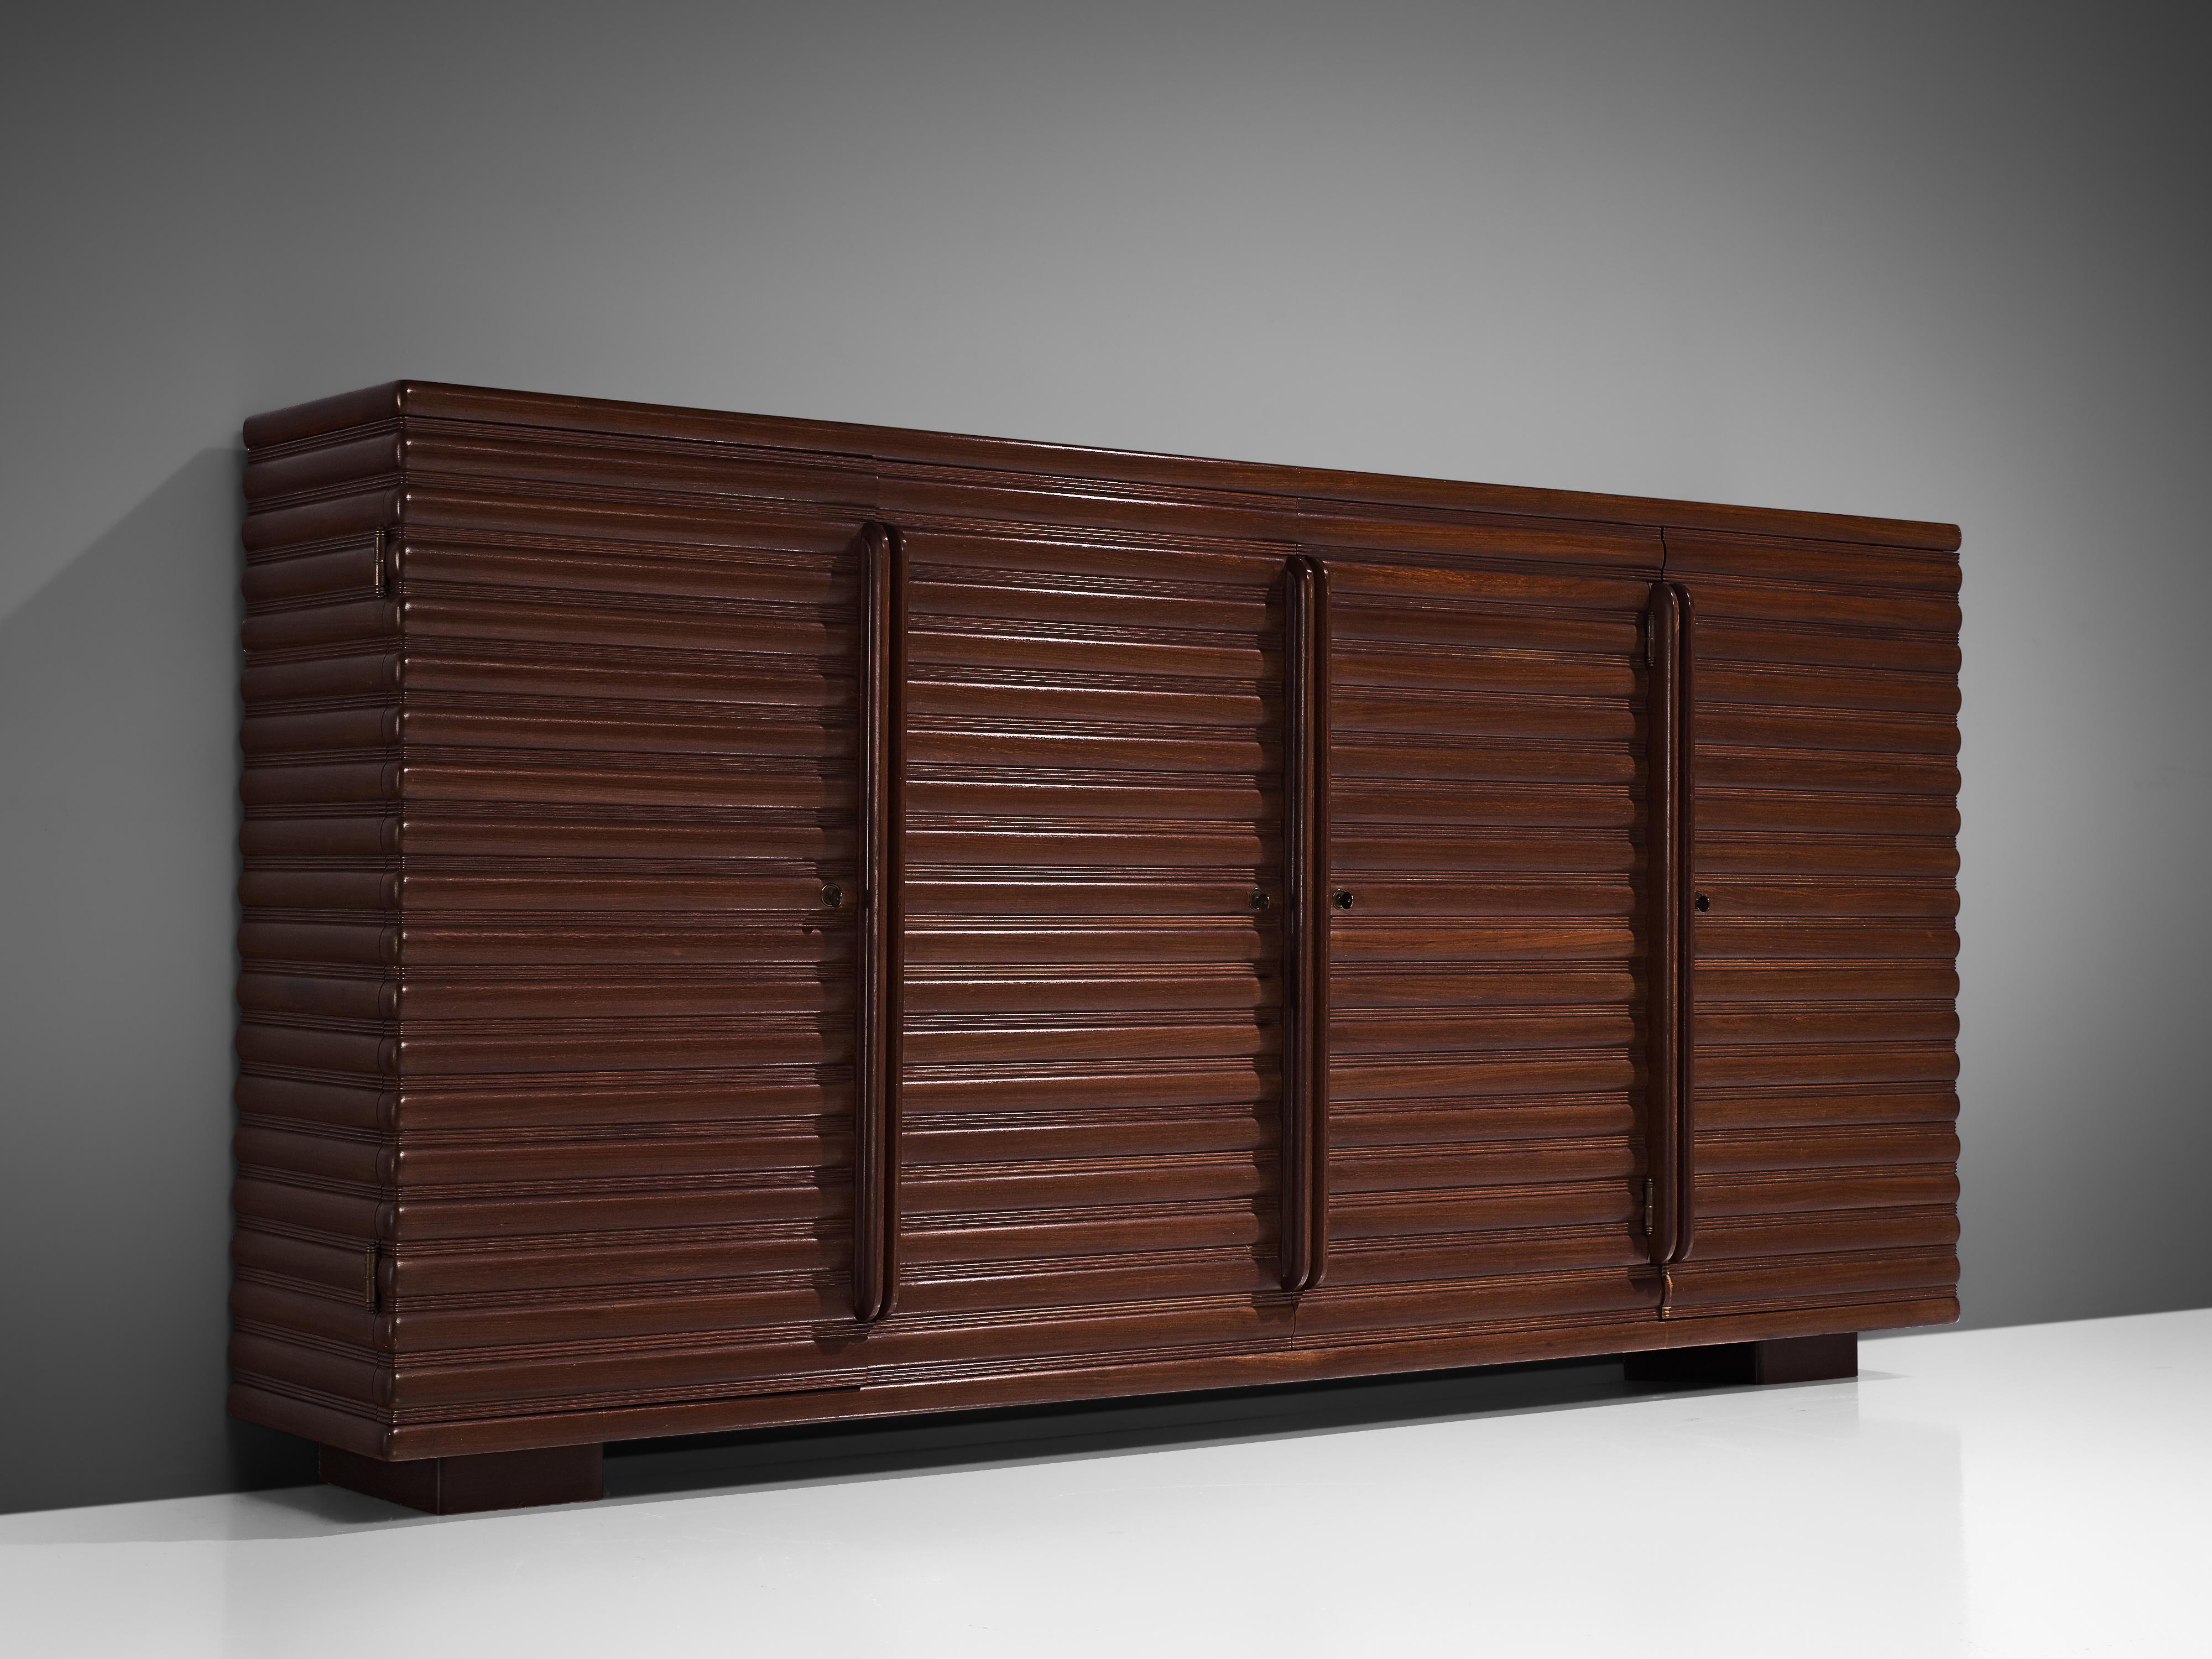 Enrico and Paolo Borghi, sideboard, oak, Italy, 1950s.

Beautiful and elegant Italian sideboard with carved surface. It shows a pattern stained wooden structure, build up from repeating horizontal lines. The side board is high and rests on two